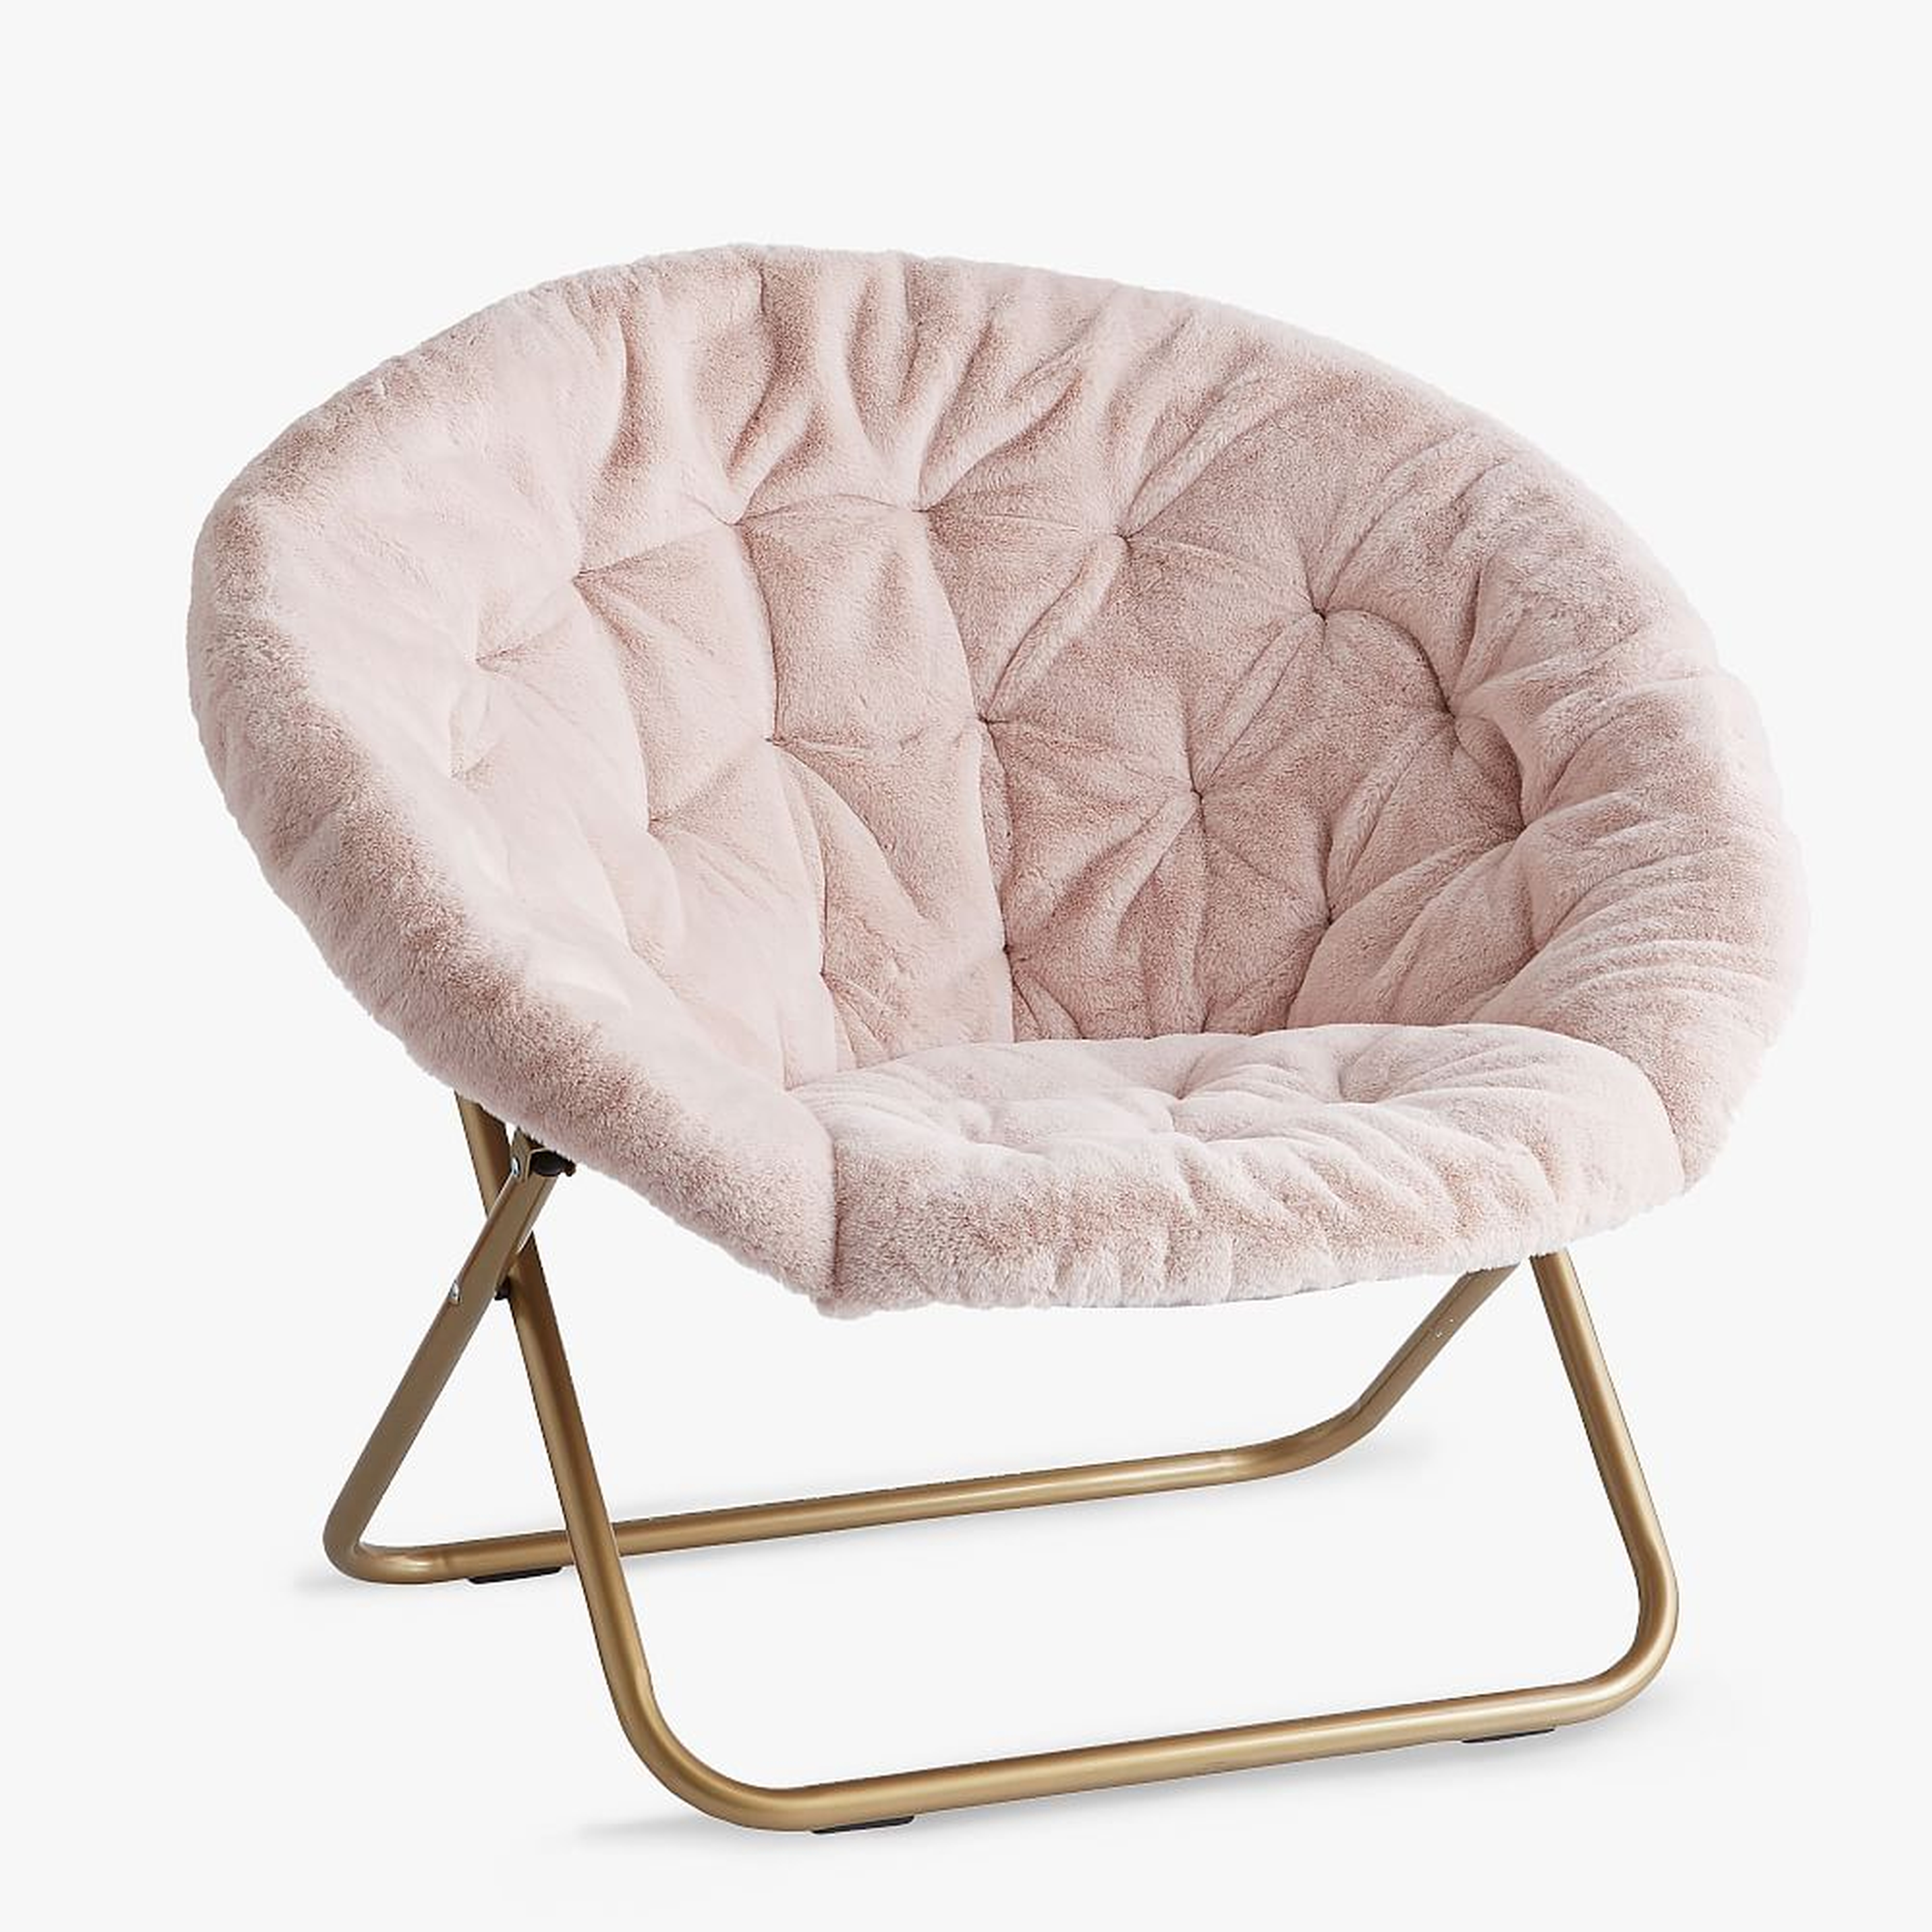 Faux Fur Hang-A-Round Chair, Blush/Pink - Pottery Barn Teen